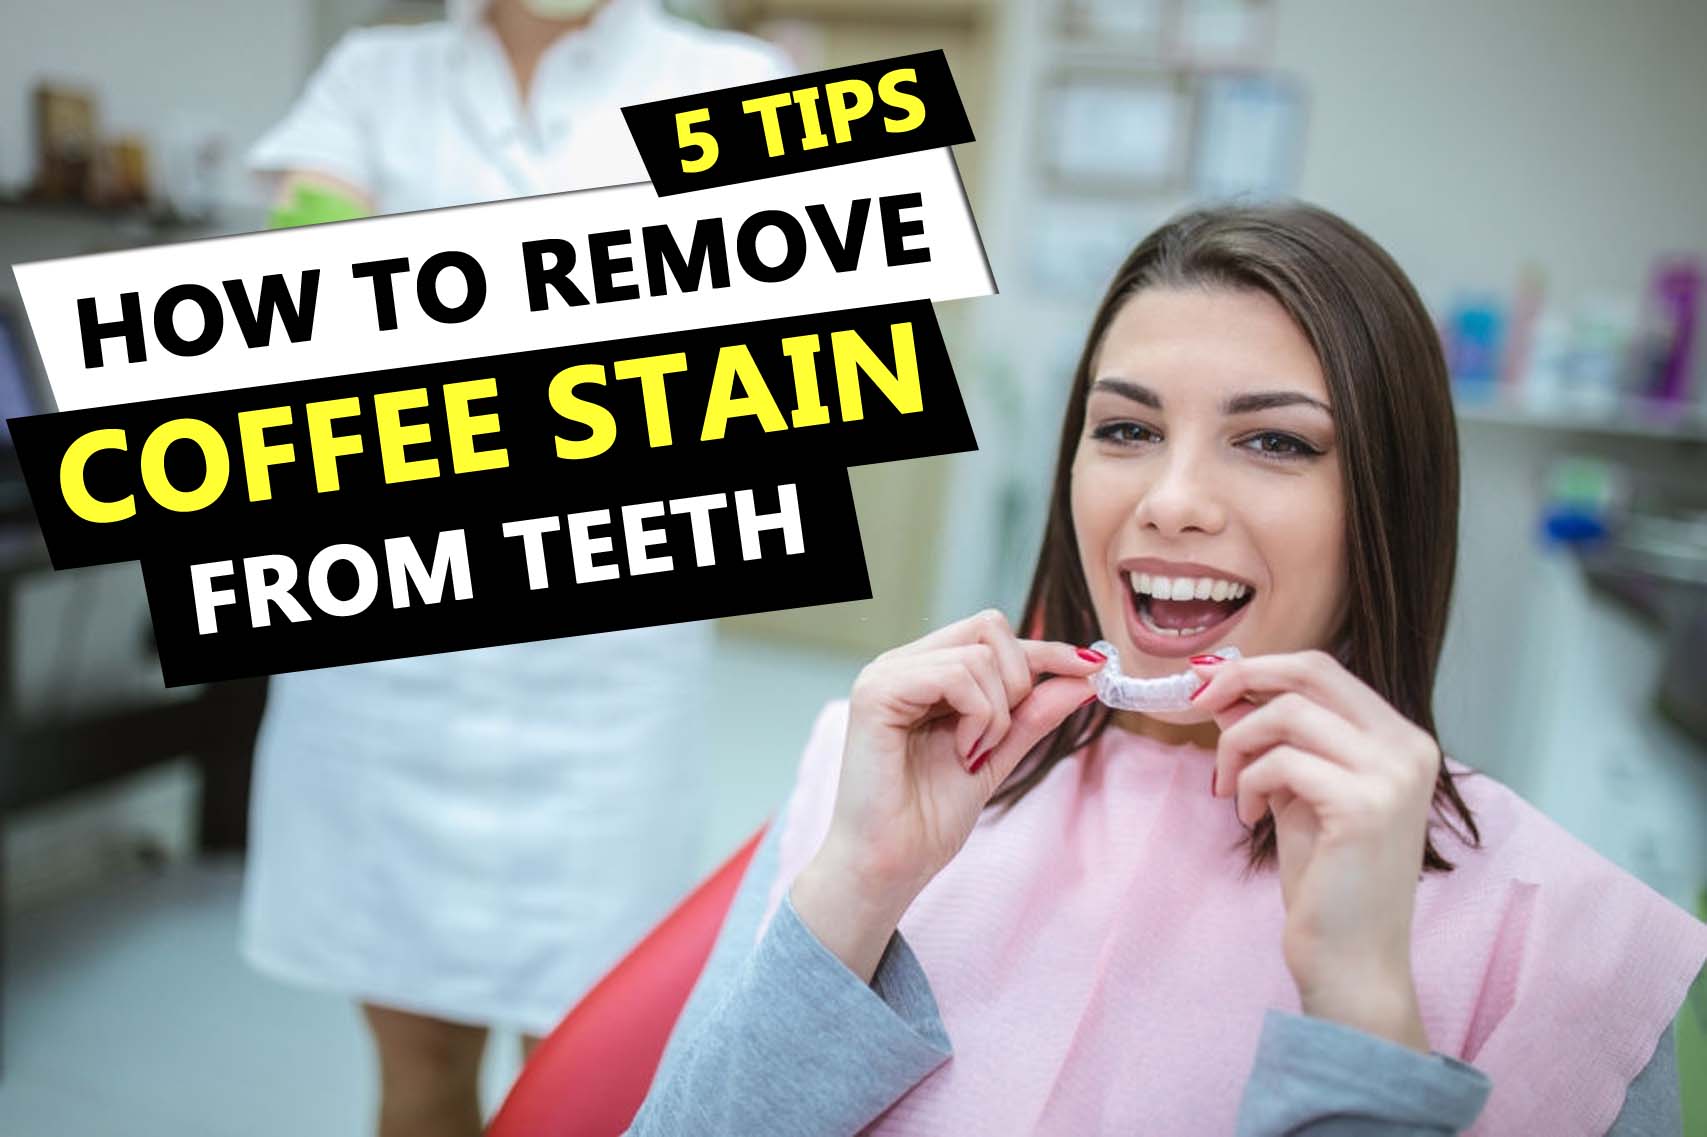 5 Tips On How To Remove Coffee Stain From Teeth photo